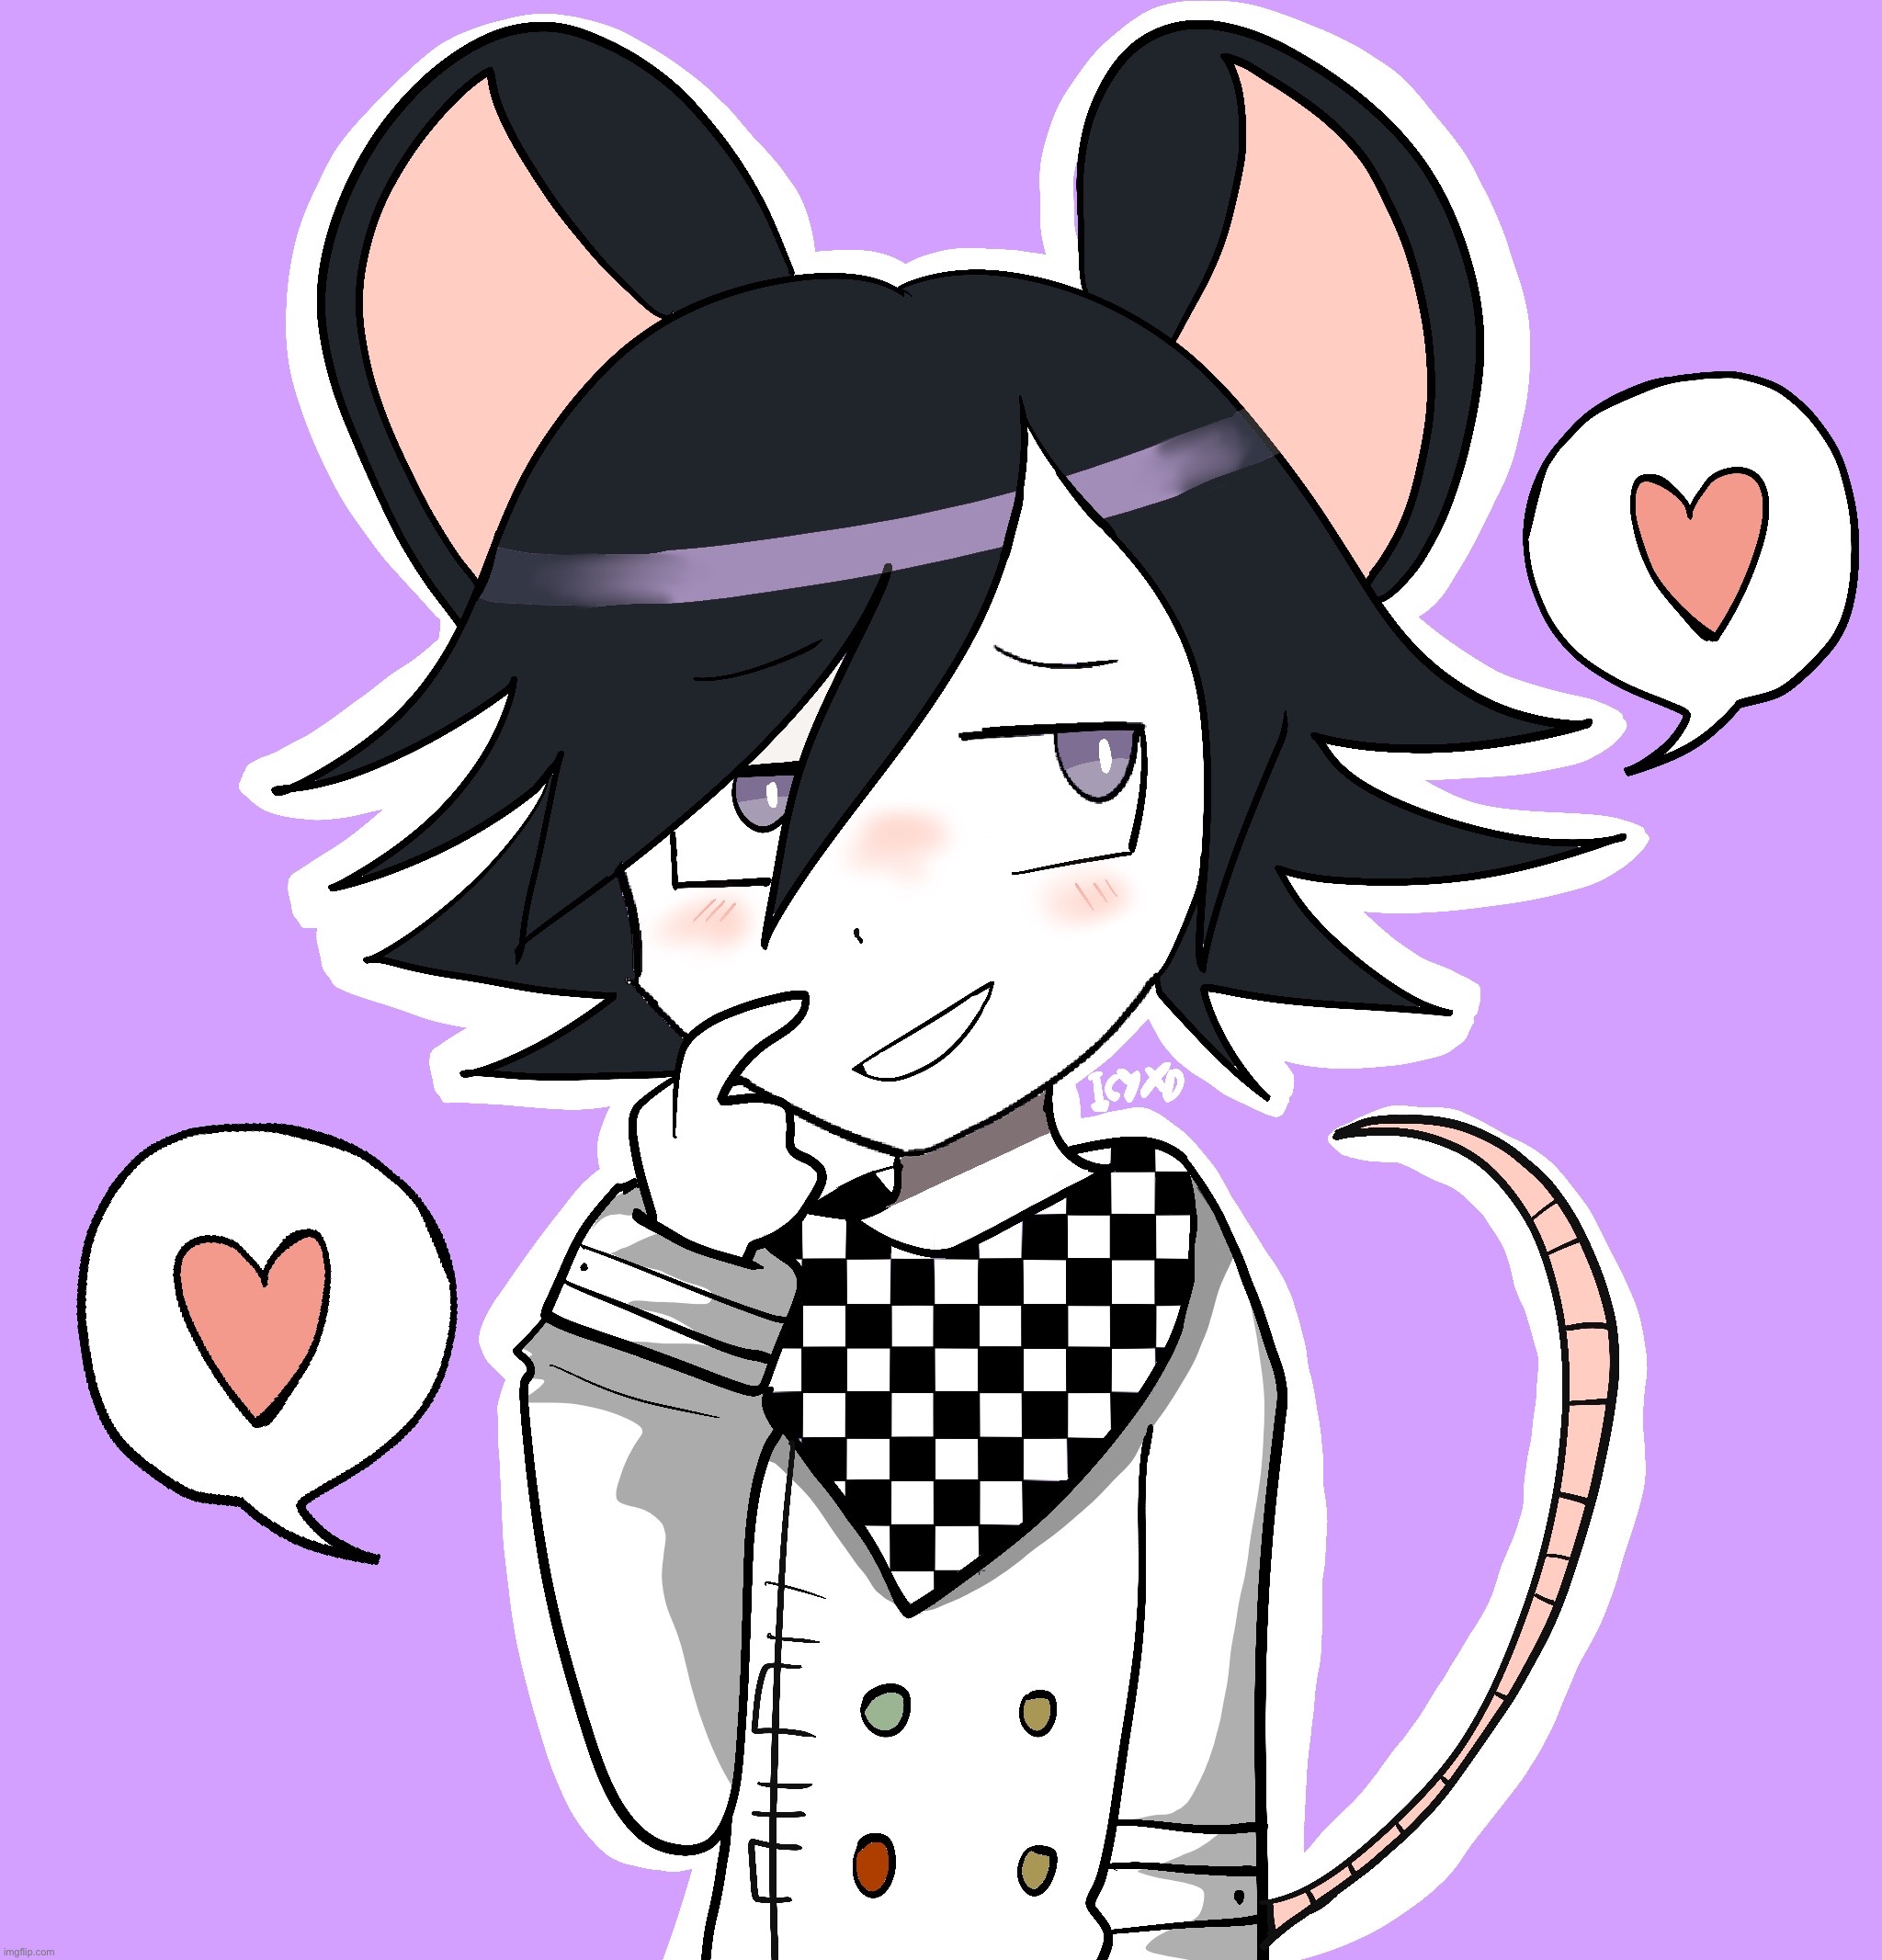 He really is our little Rat Boy, isn’t he? | image tagged in kokichi oma,danganronpa | made w/ Imgflip meme maker